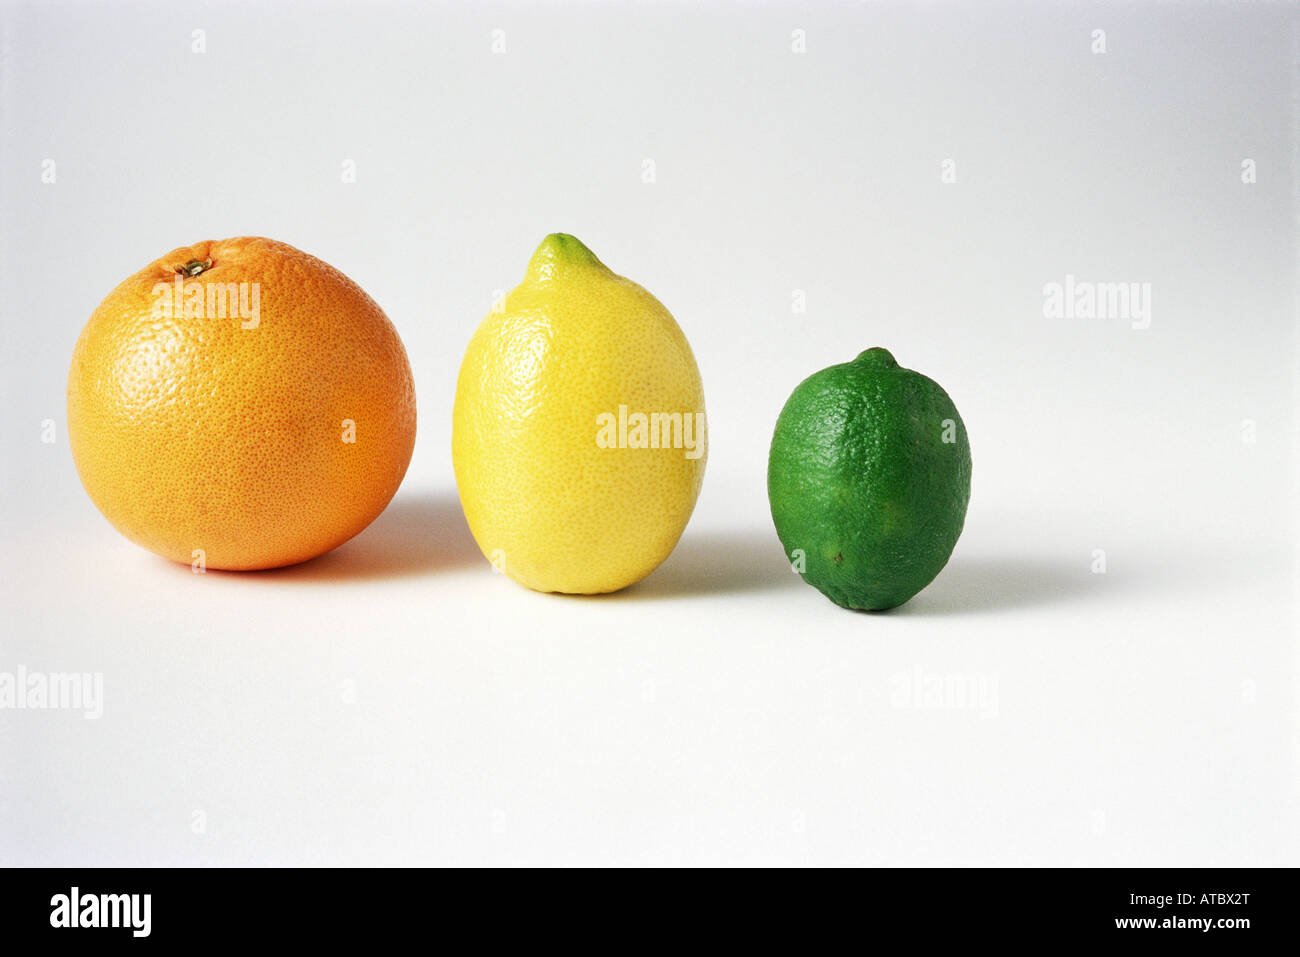 Orange, lemon, and lime in a row, close-up Stock Photo